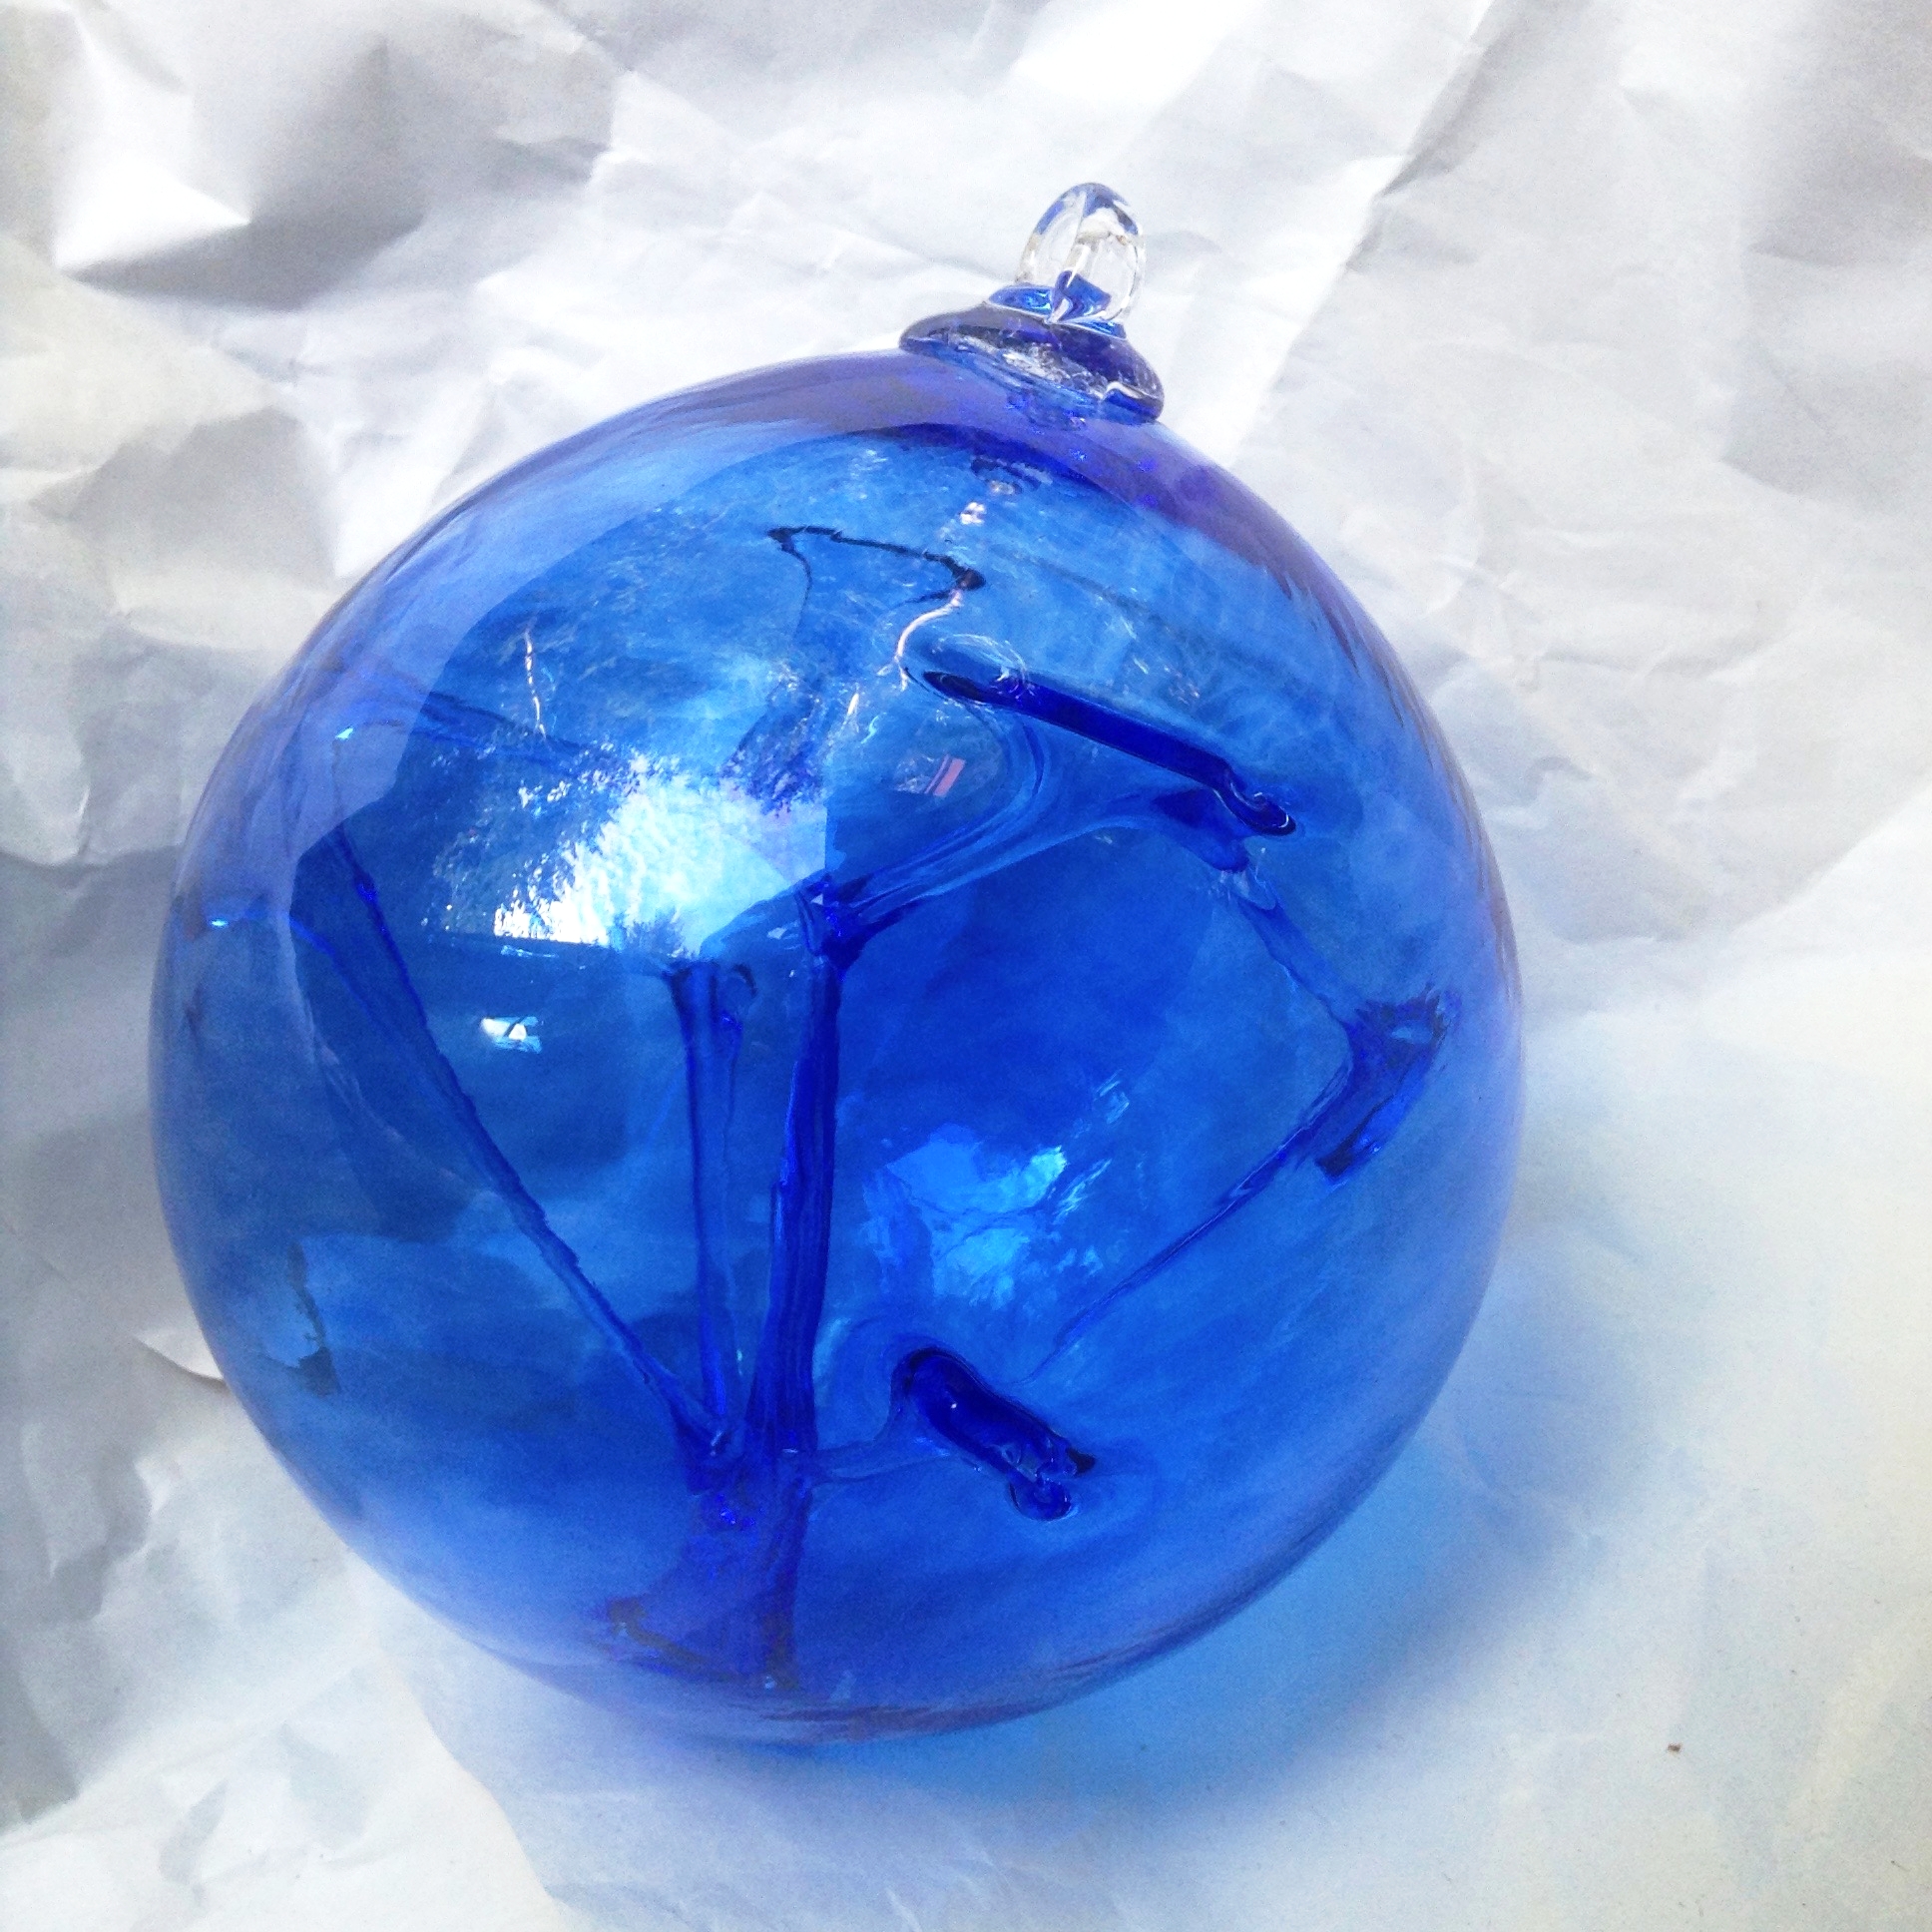 1 Hanging Glass Ball 4" Diameter Blue and Green Witch Ball GB14 